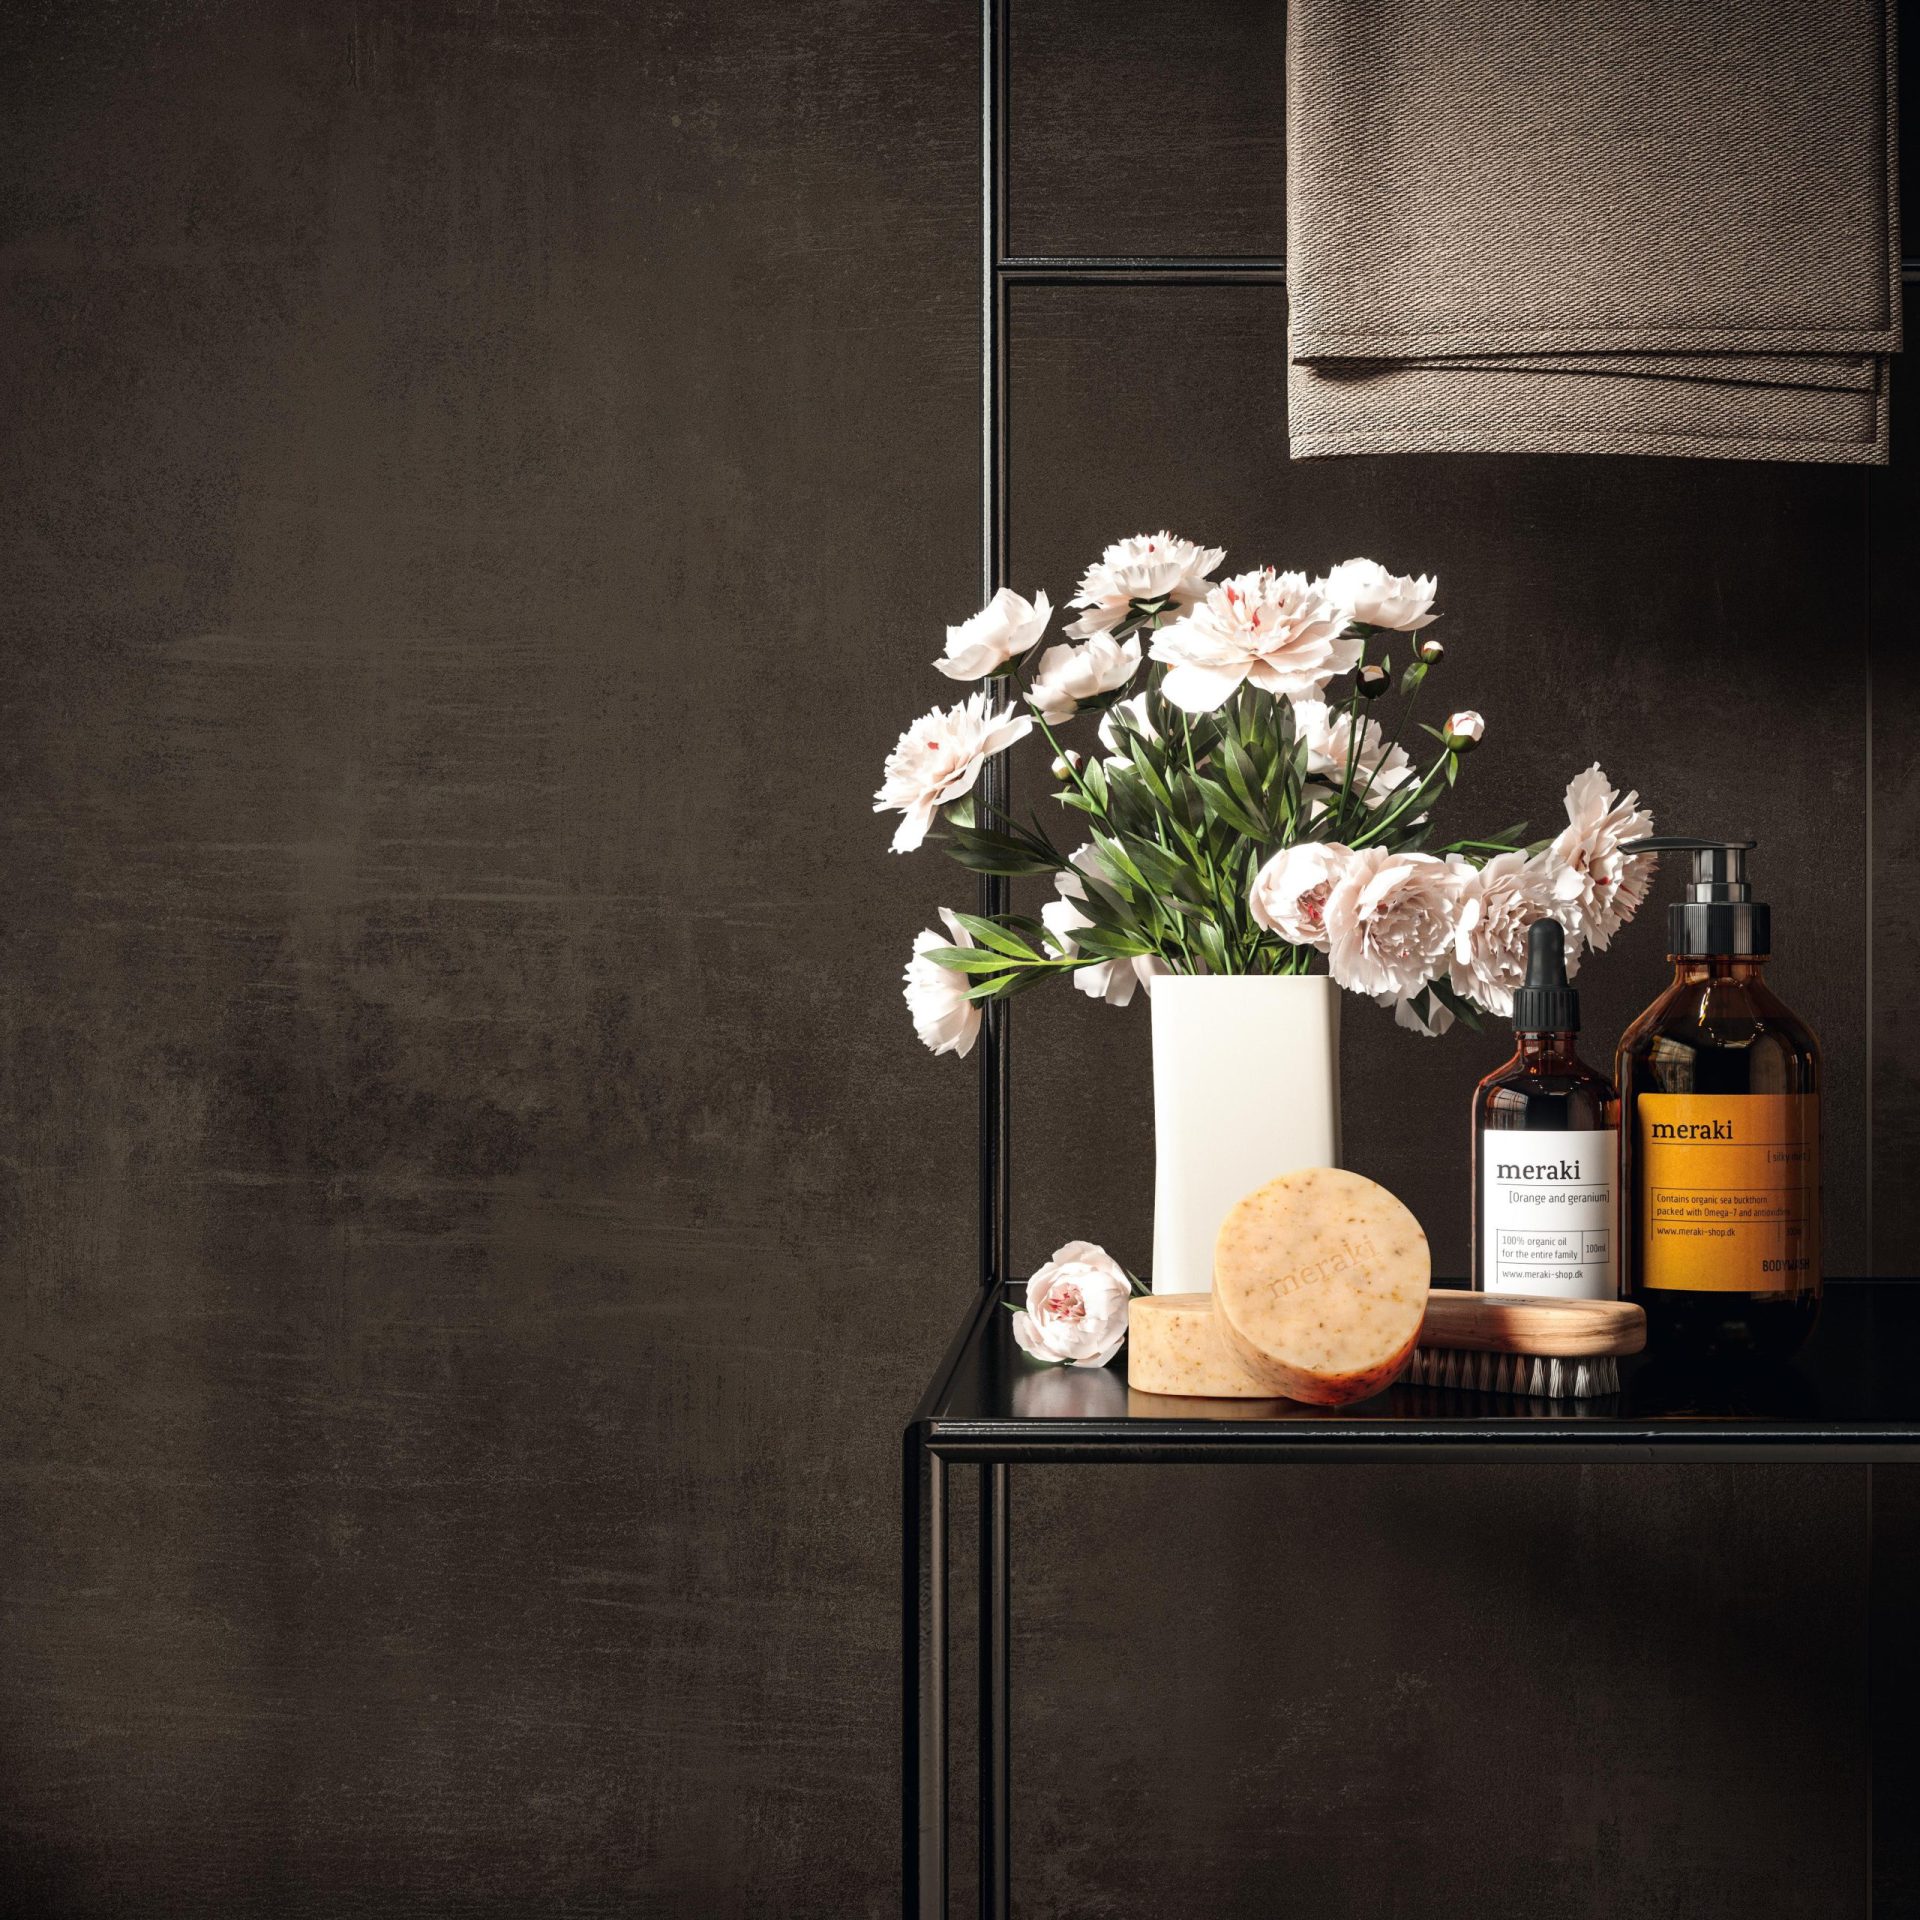 Tobacco color Boost Pro porcelain tile on wall in front of flowers